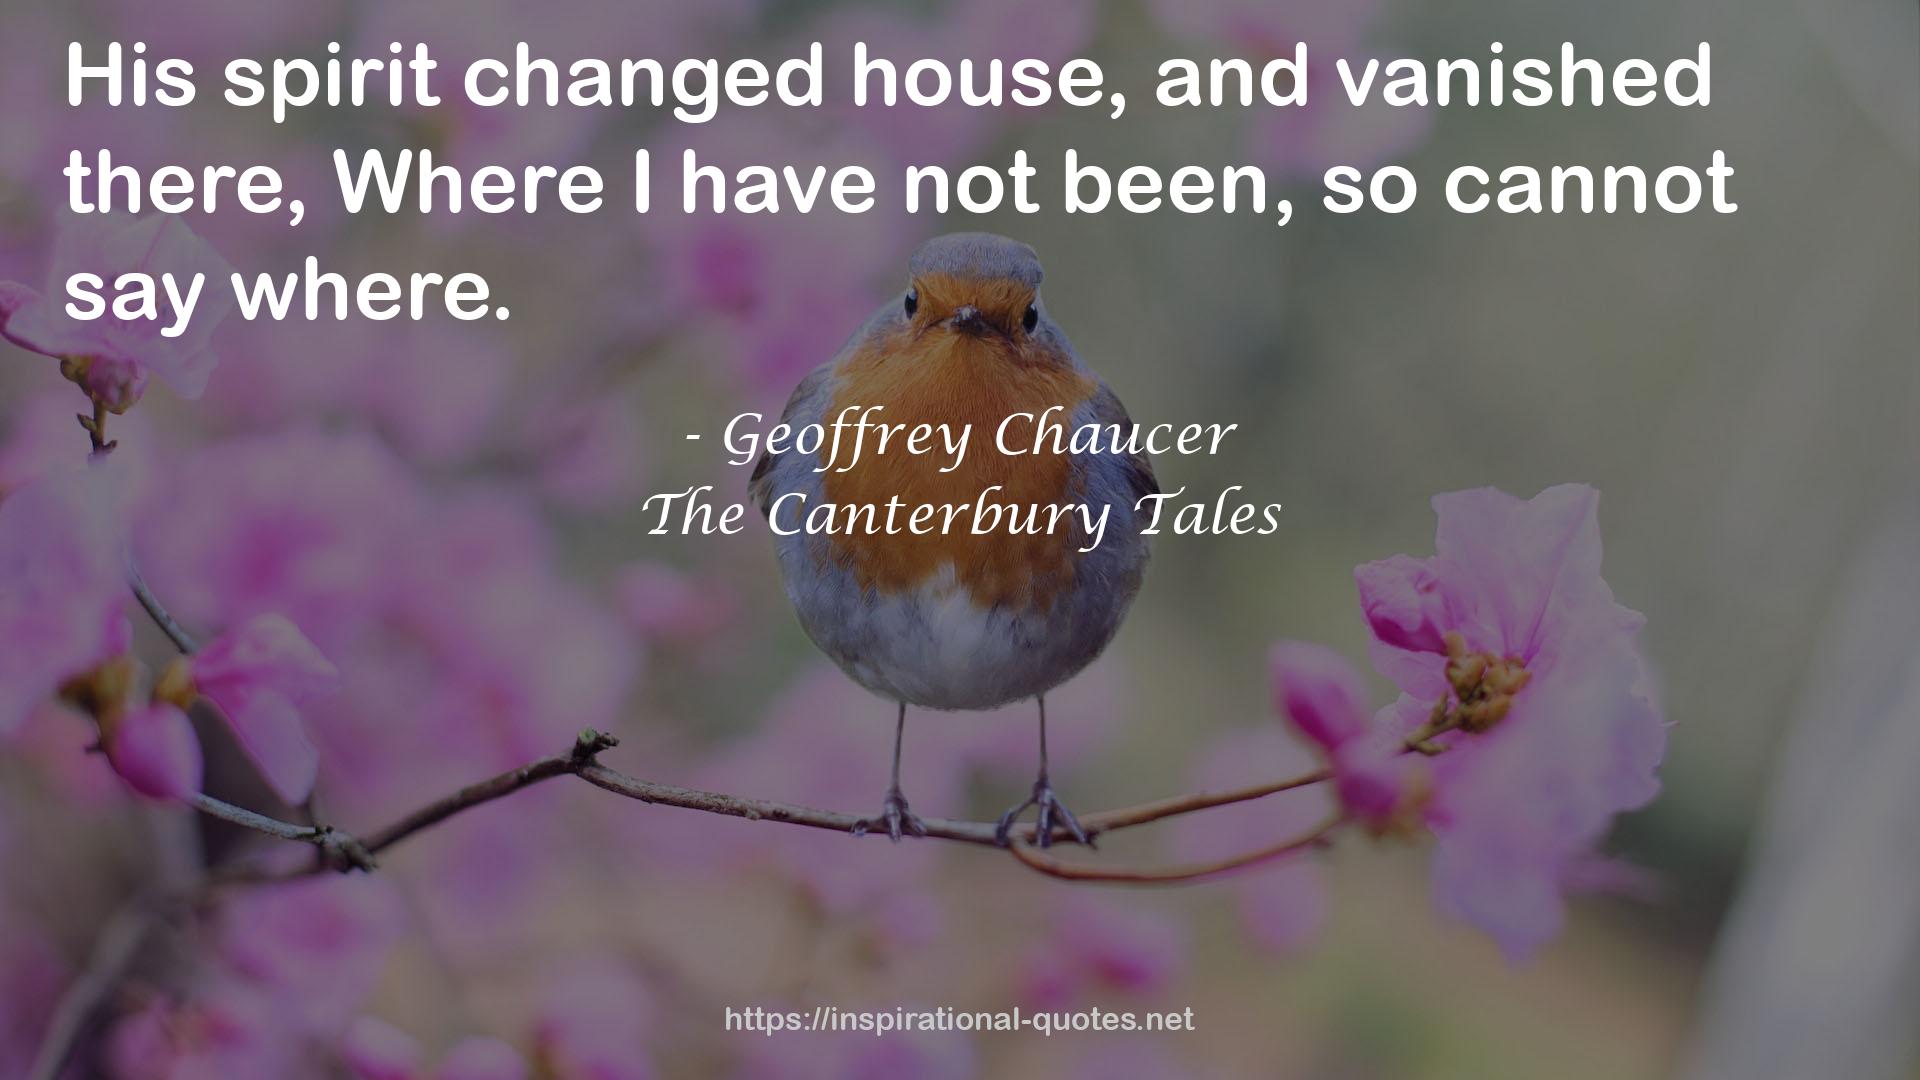 The Canterbury Tales QUOTES